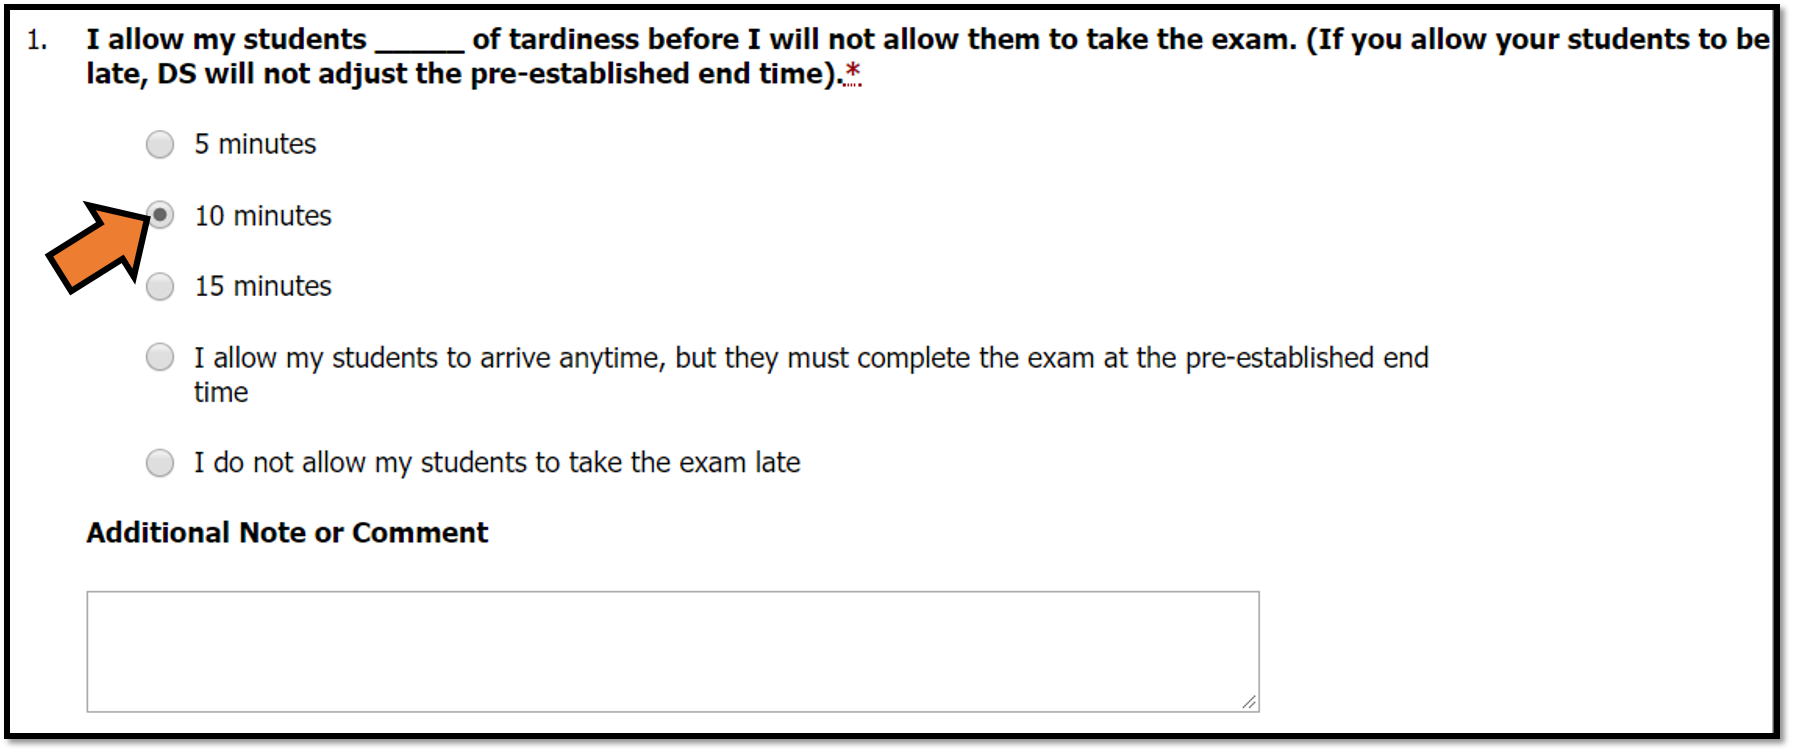 Reviewing the two option from the drop down list within the PROCTORING YOUR OWN EXAM. If your testing situation is not satisfied through either of these options, then skip this section. Proceed to the Alternative Testing Agreement section and answer each question